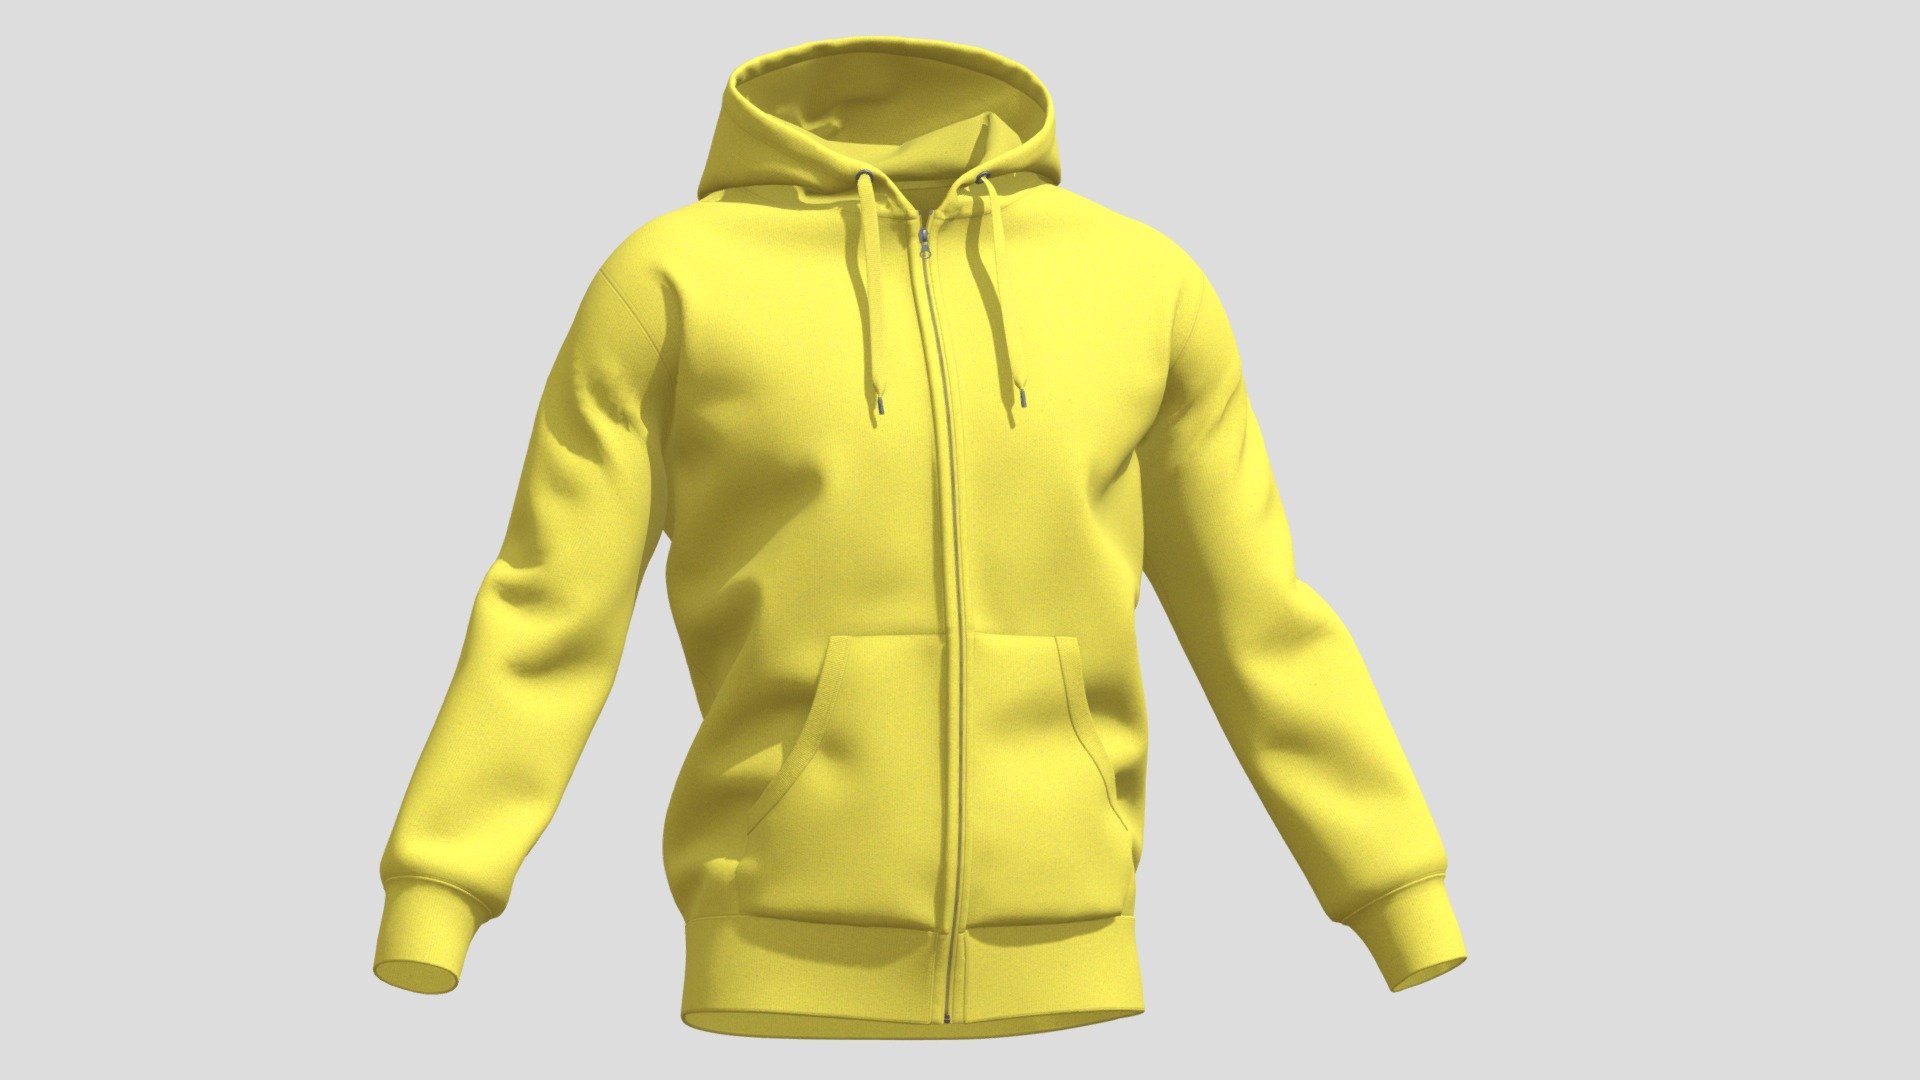 Hi, I'm Frezzy. I am leader of Cgivn studio. We are a team of talented artists working together since 2013.
If you want hire me to do 3d model please touch me at:cgivn.studio Thanks you! - Hoodie Zip Yellow PBR Realistic - Buy Royalty Free 3D model by Frezzy (@frezzy3d) 3d model